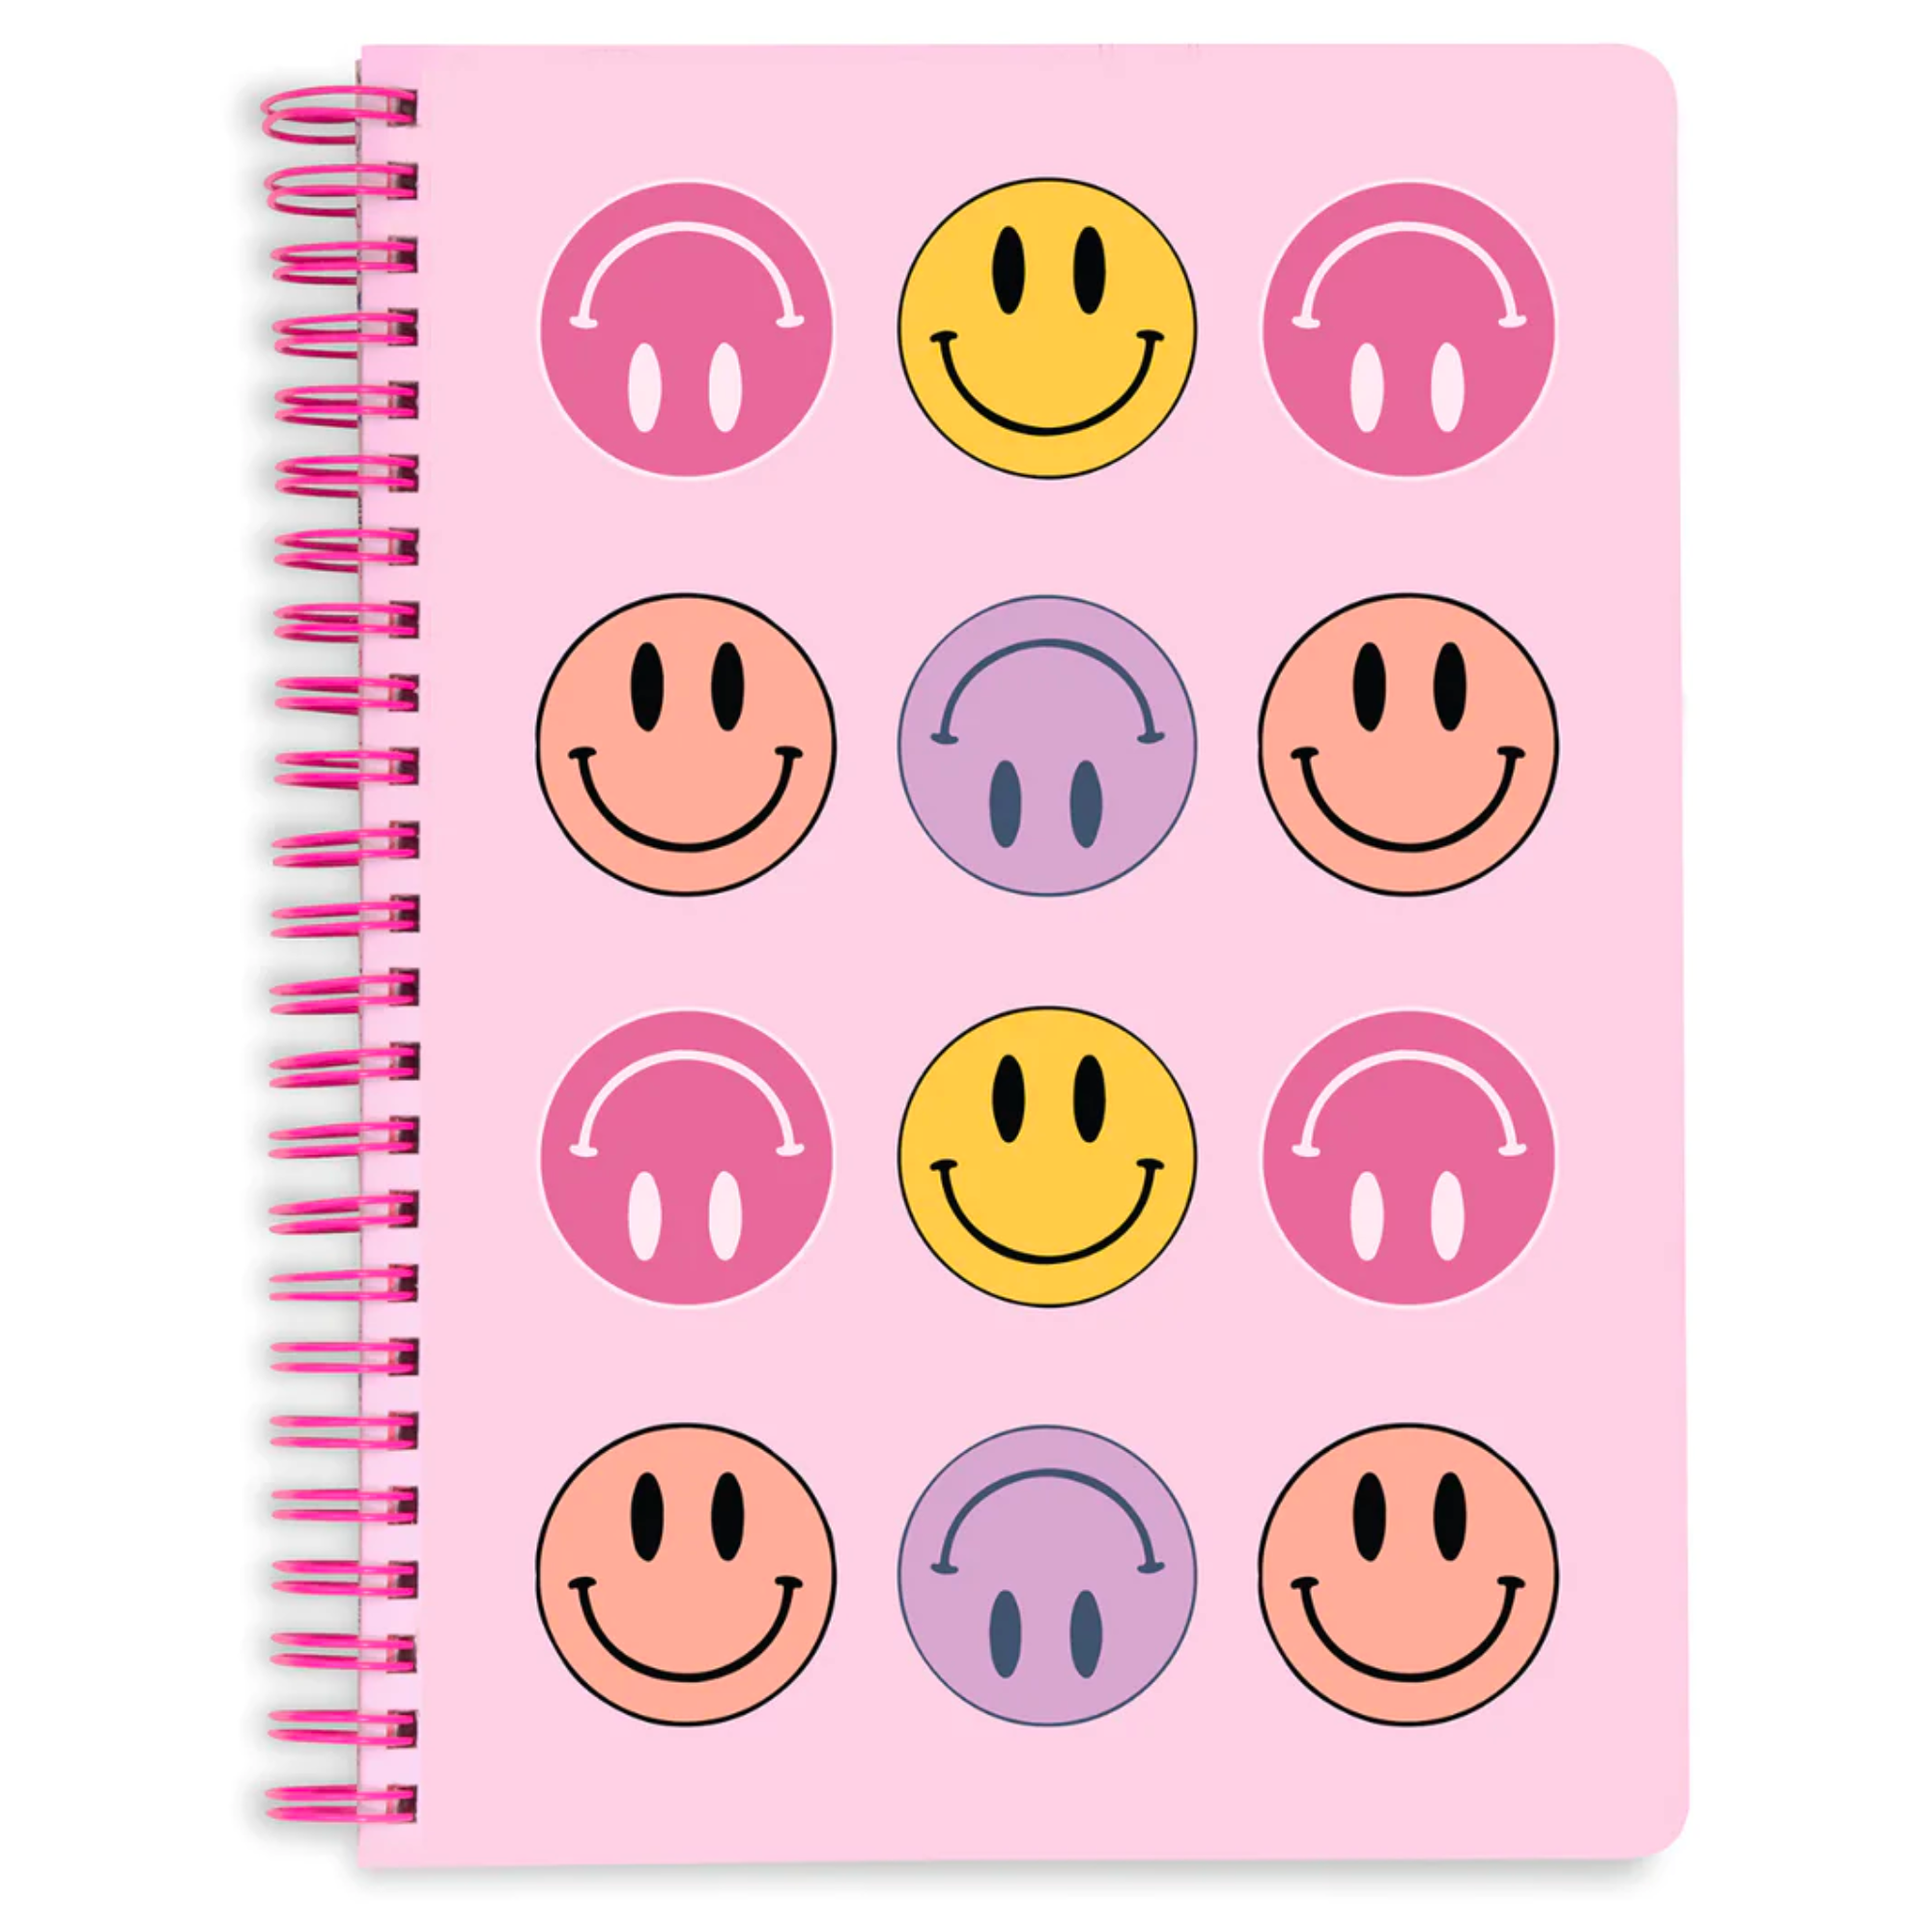 Mini Notebook, Pink Stacked Smiley